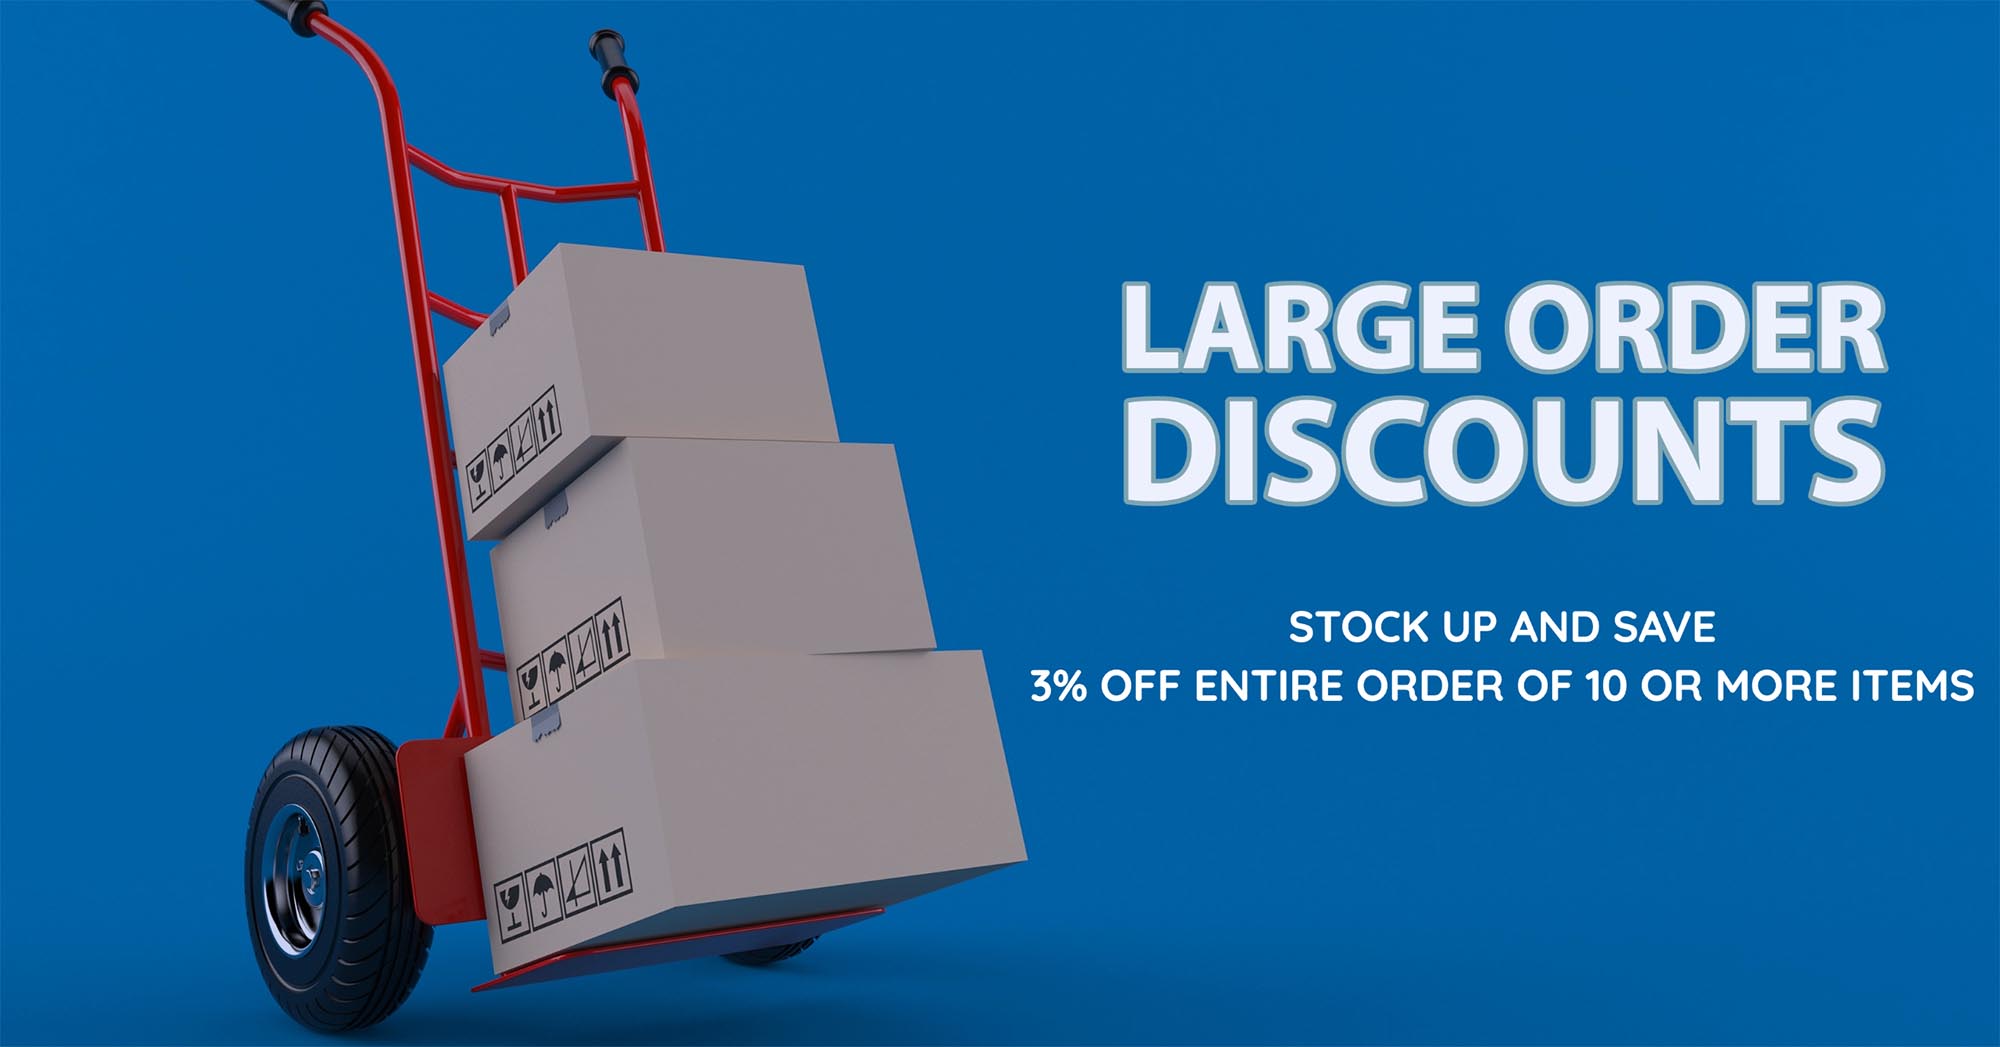 Stock up and save 3% on your entire order with our Large Order Discount.